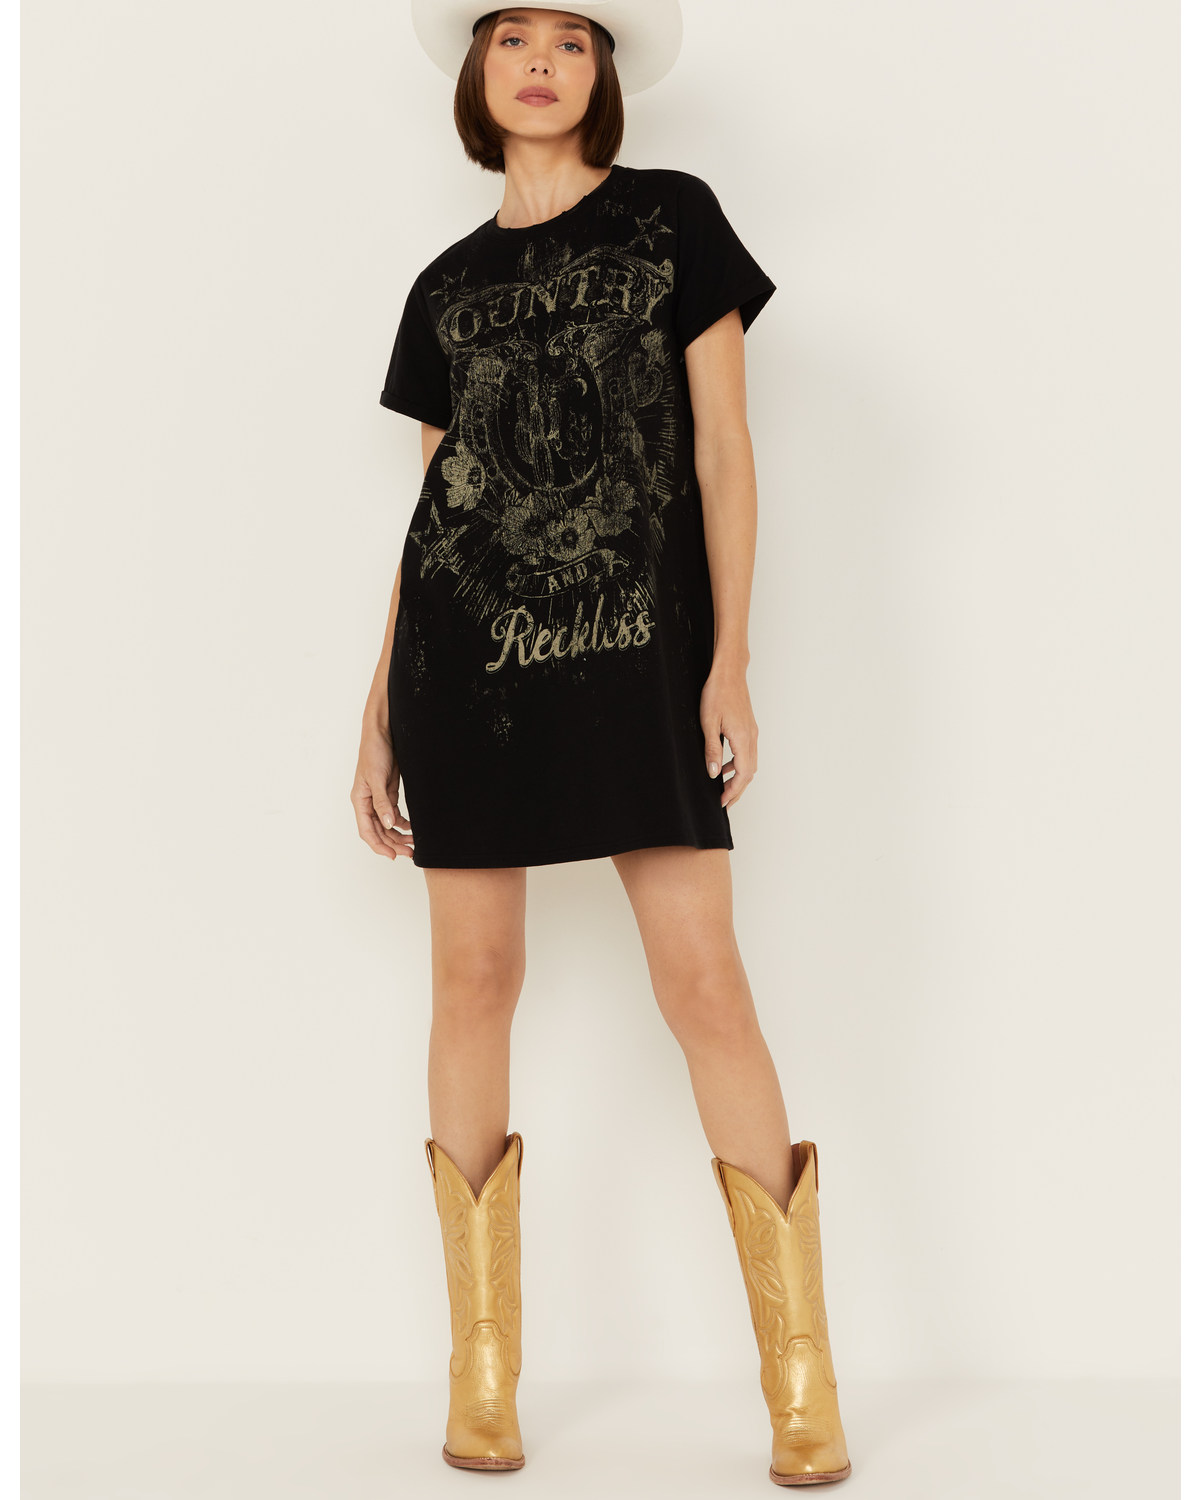 Blended Women's Country Reckless Graphic Tee Mini Dress